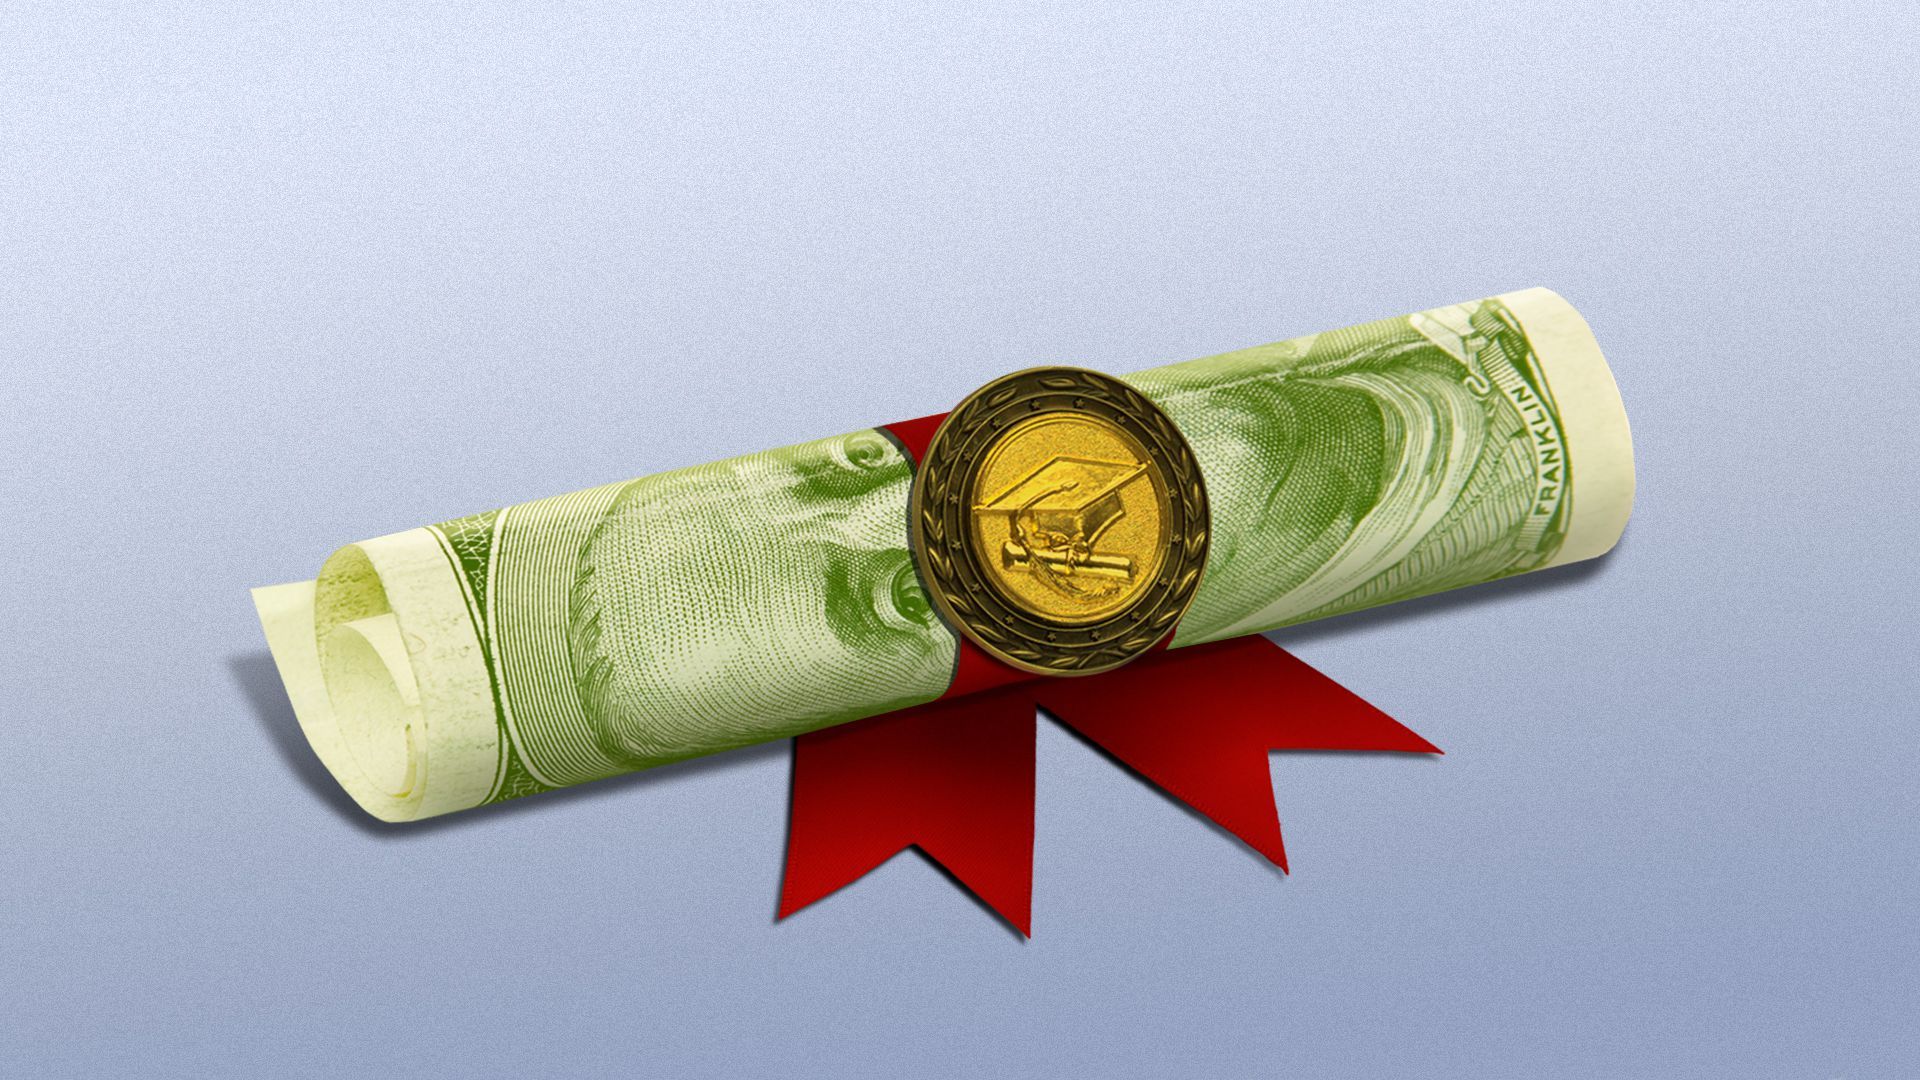 Illustration of a hundred dollar bill wrapped up like a college diploma